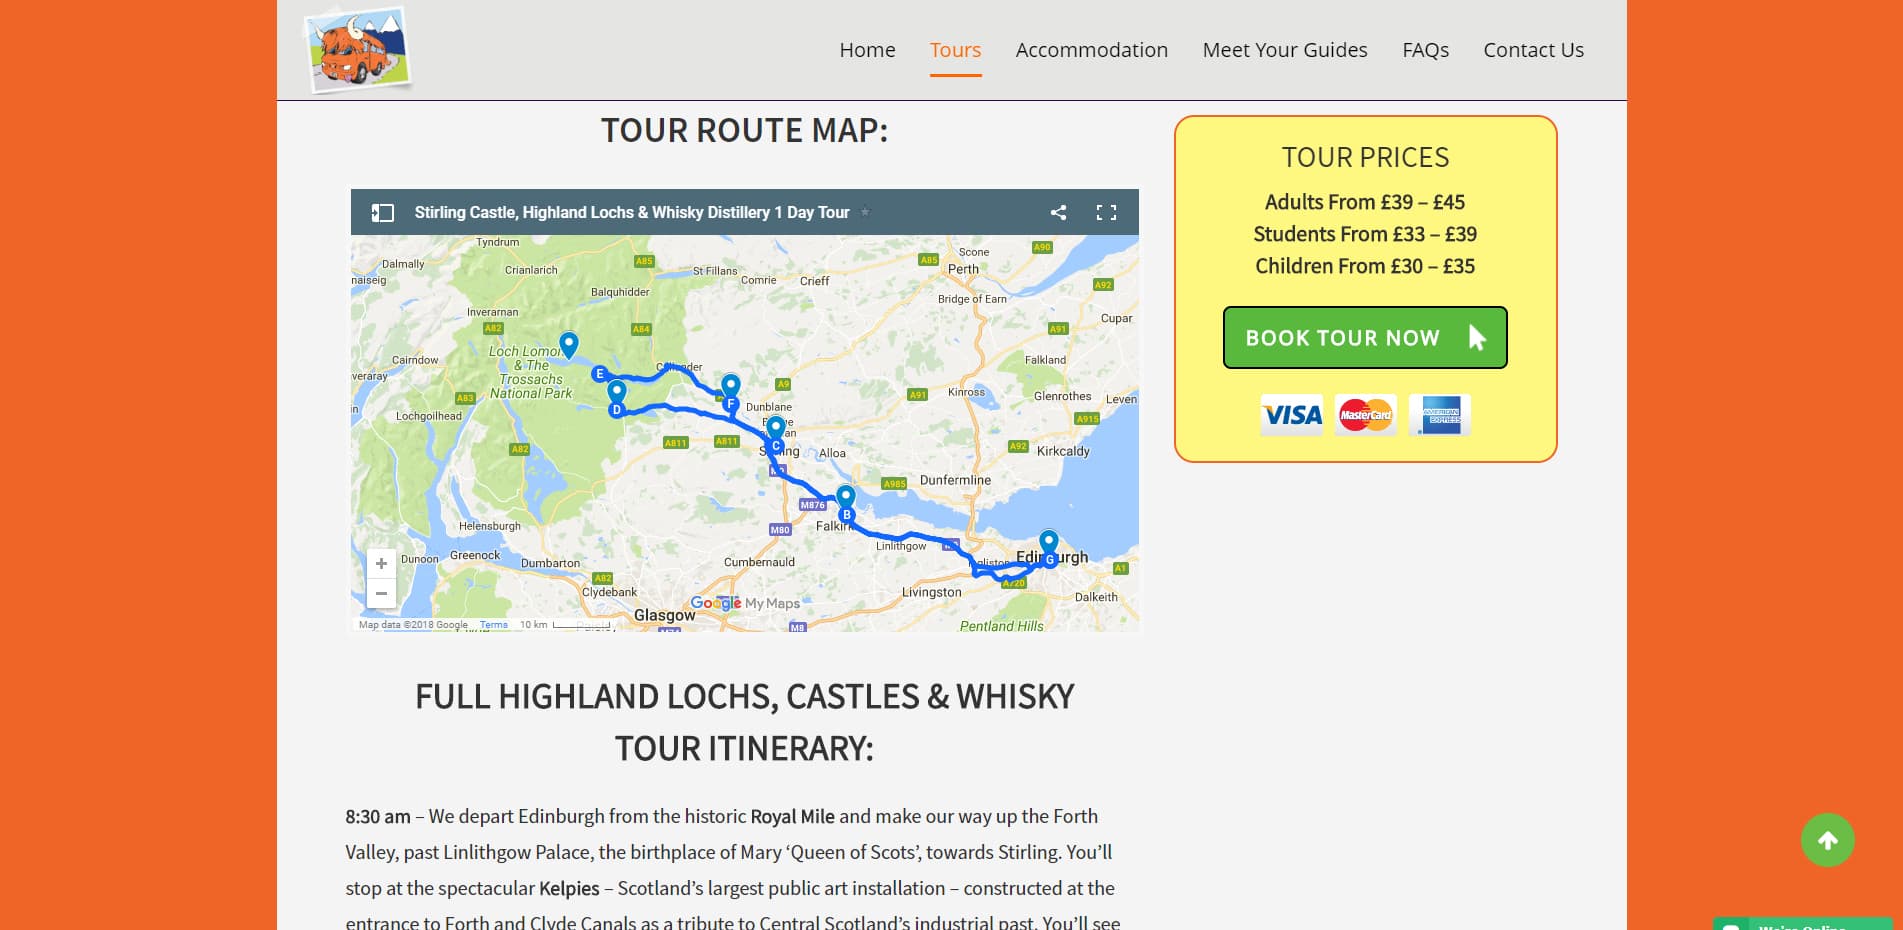 Hairy Coo Tour Map Section